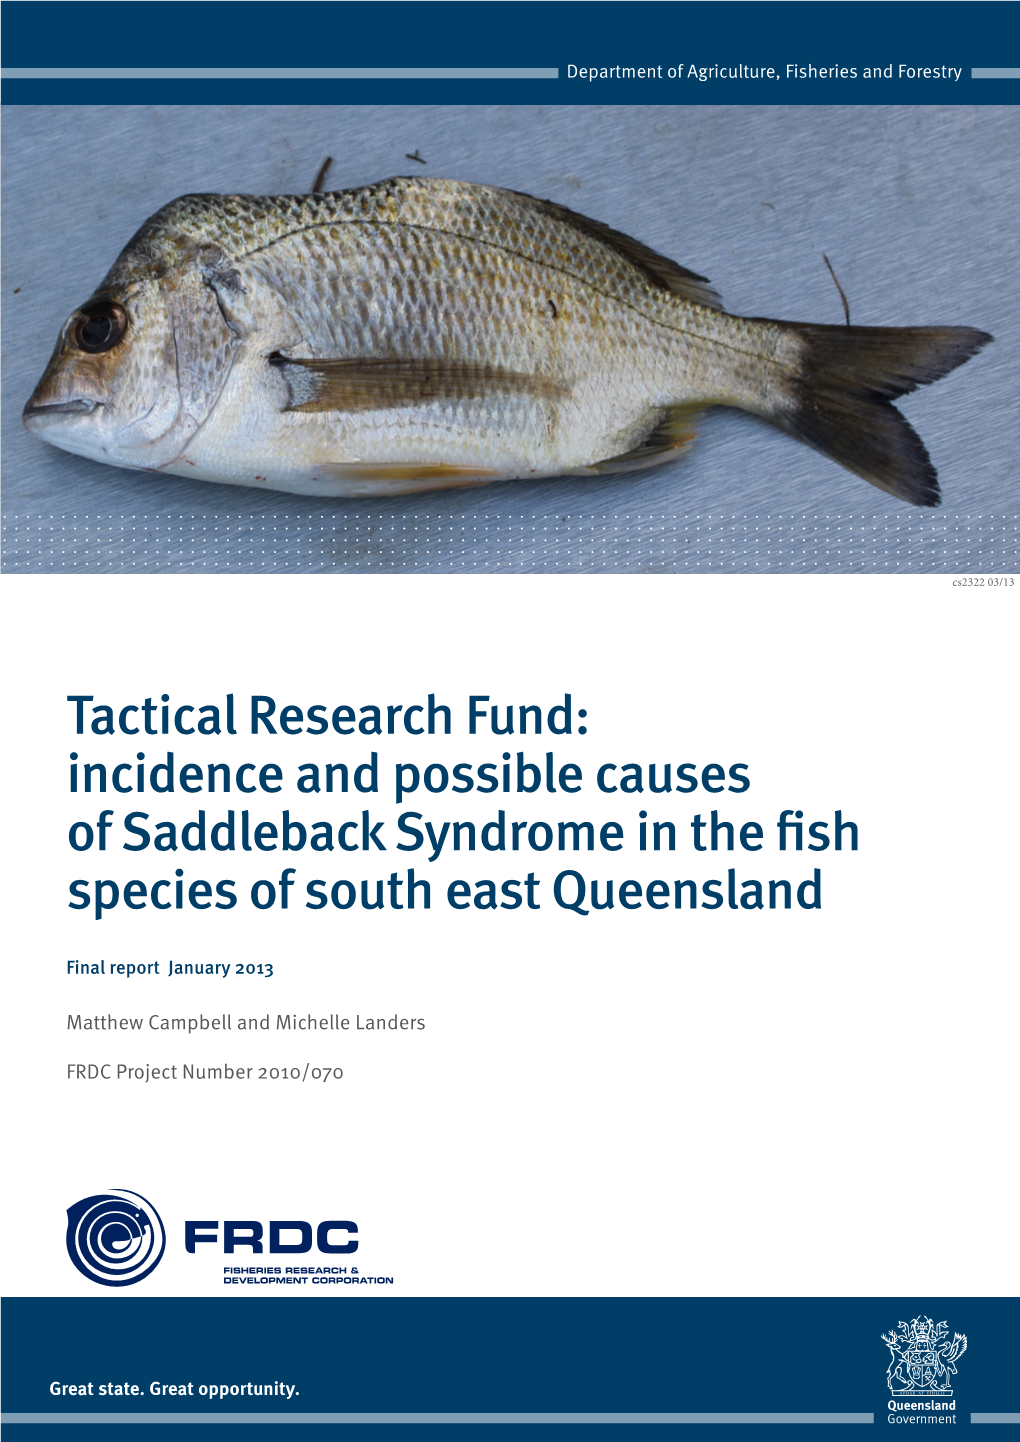 Incidence and Possible Causes of Saddleback Syndrome in the Fish Species of South East Queensland